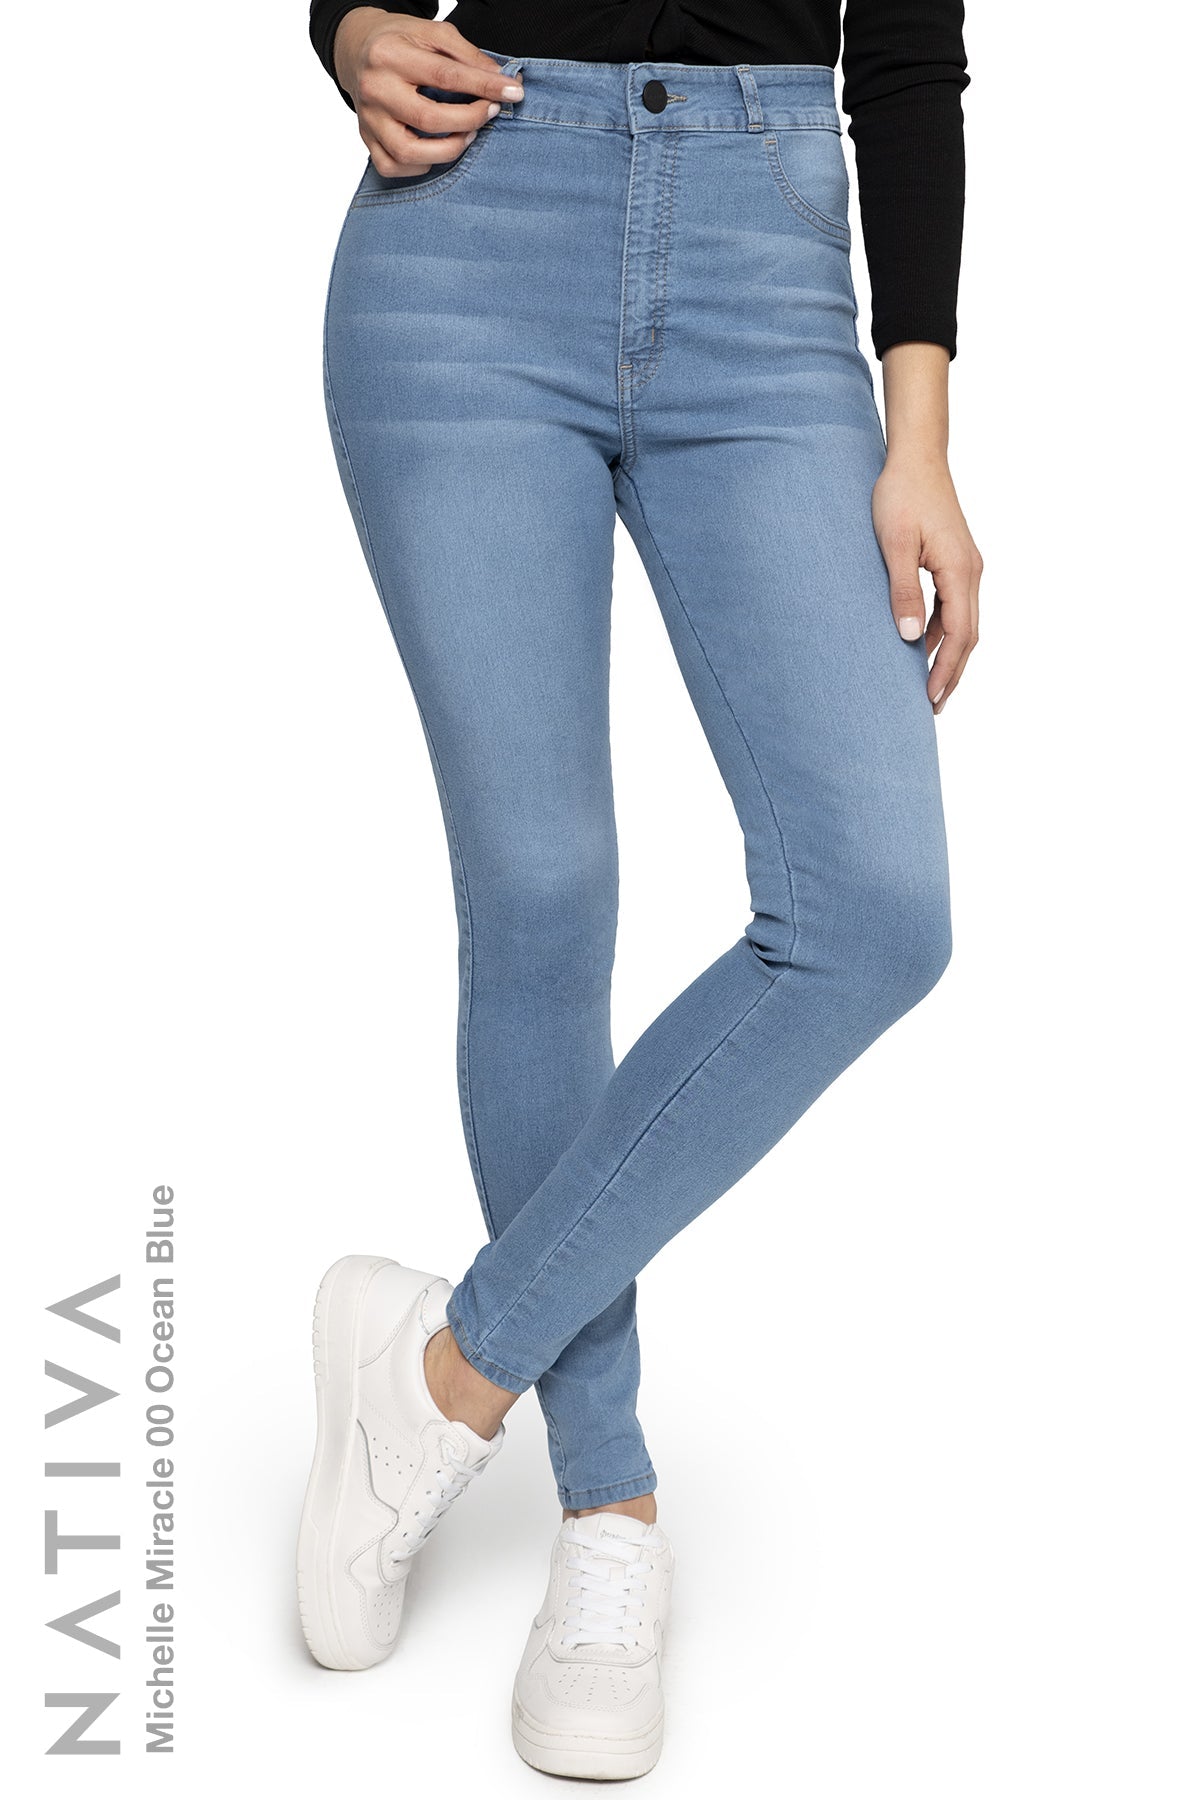 STRETCH Ca BLUE, OCEAN NATIVA, Shaping MIRACLE High JEANS. MICHELLE 00